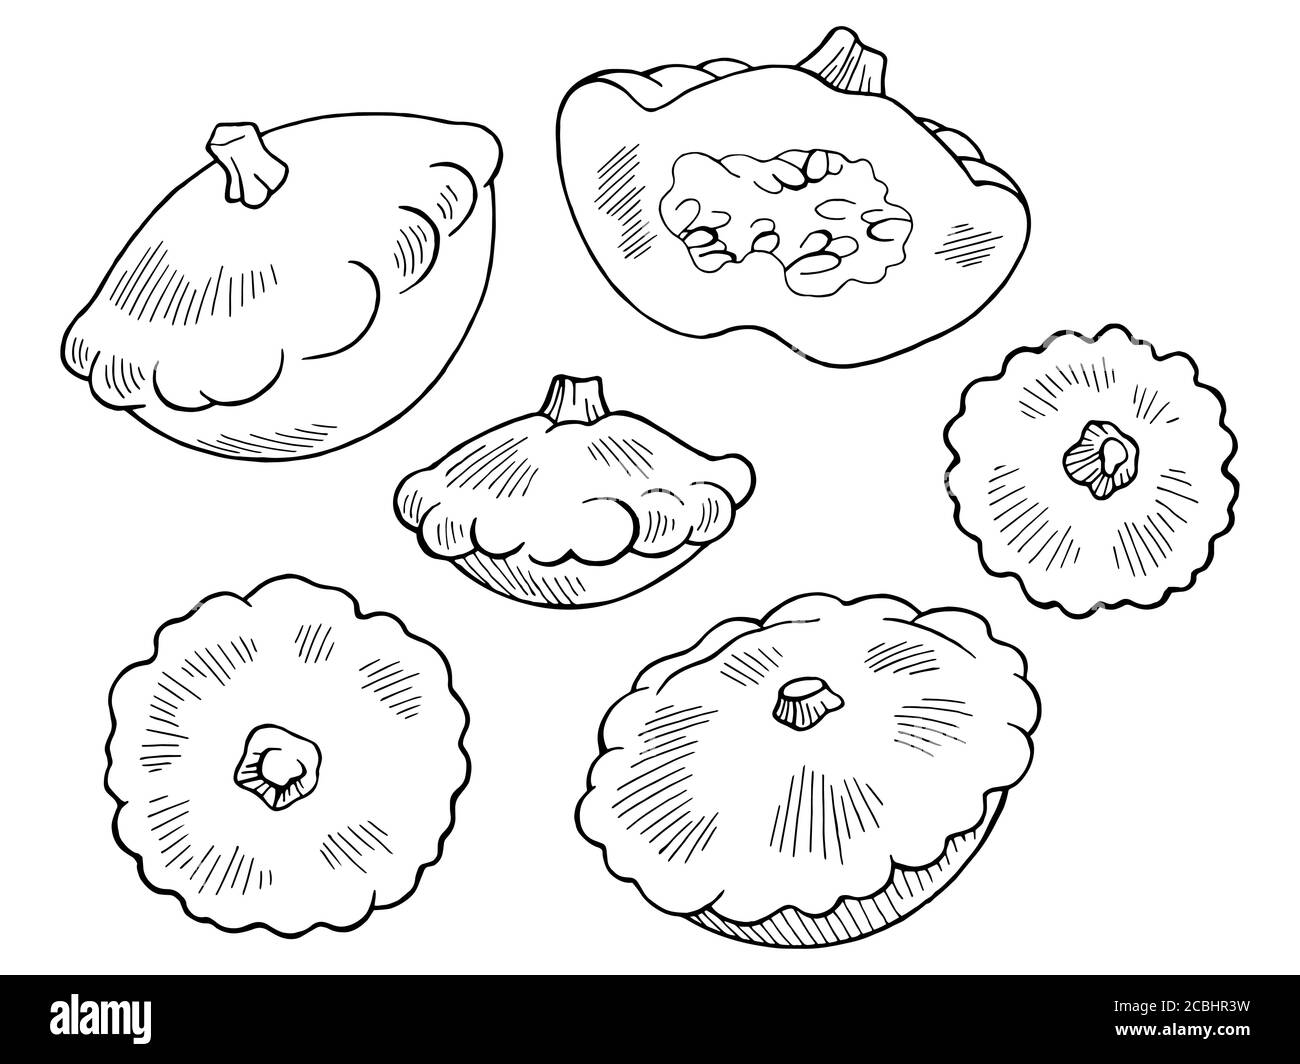 Pattypan squash graphic black white isolated sketch illustration vector Stock Vector